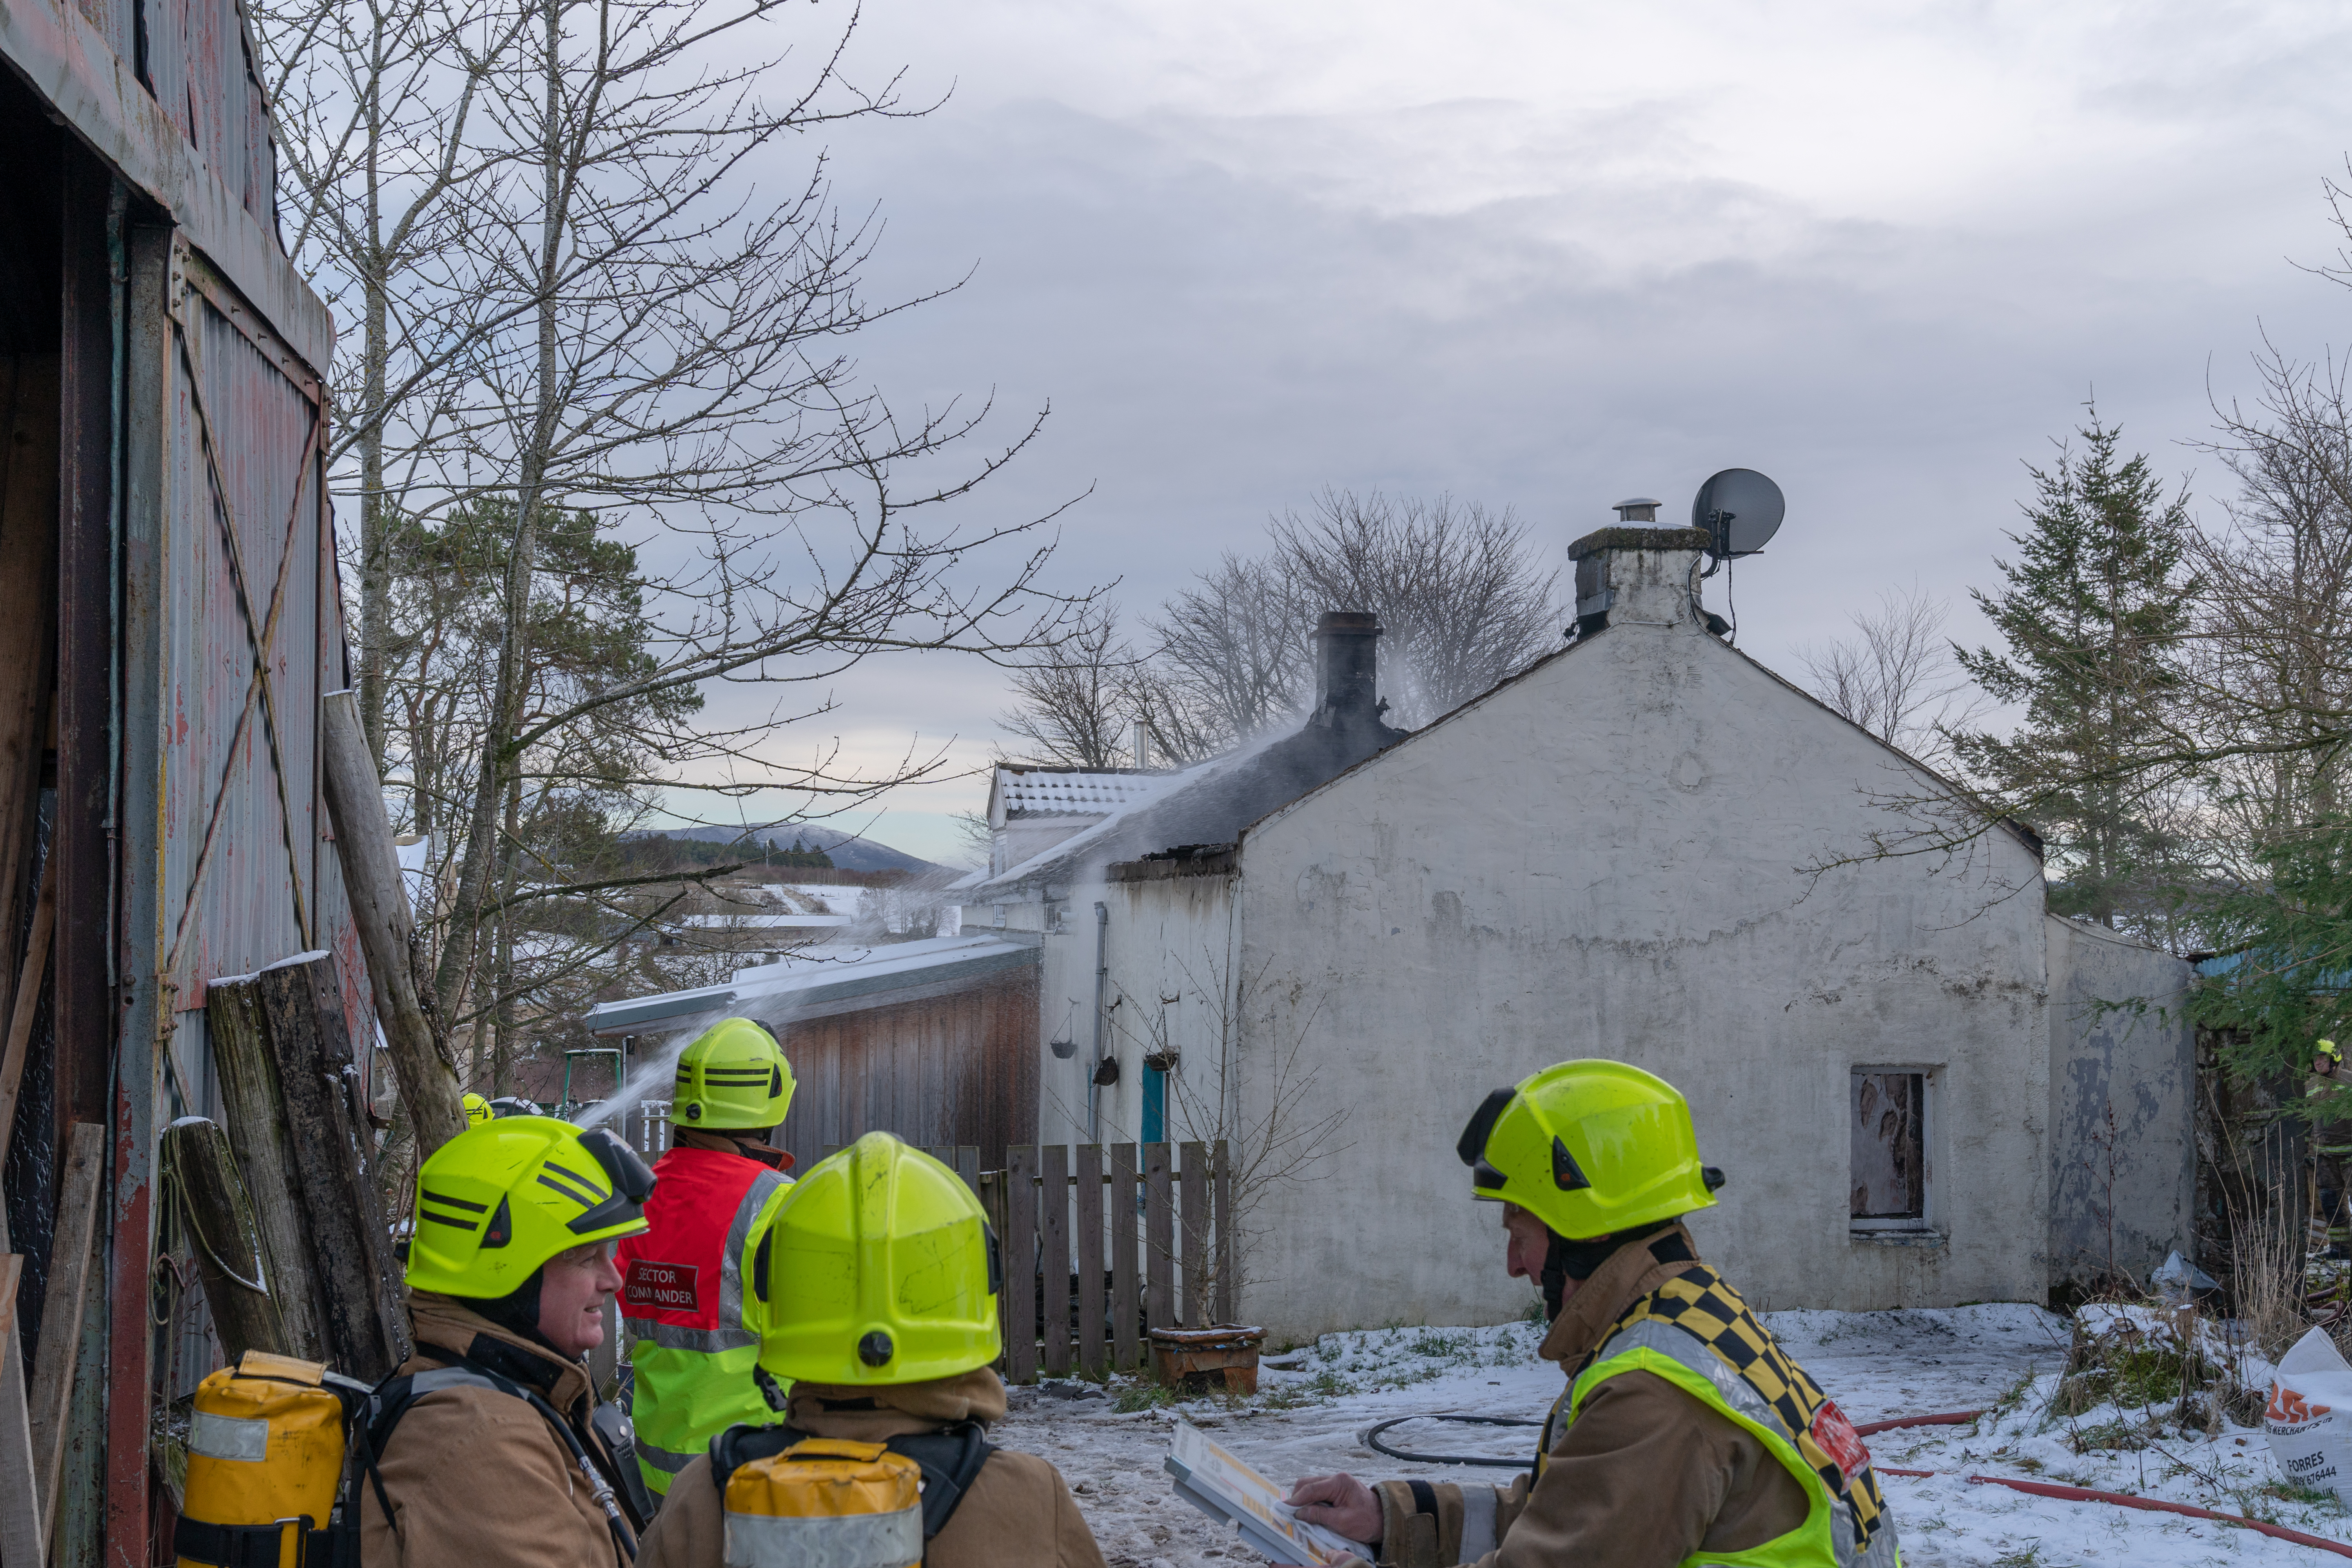 This is the scene of the fire at the Farm Cottage Fire near Newmill, Moray, Scotland. Photographed by JASPERIMAGE ©